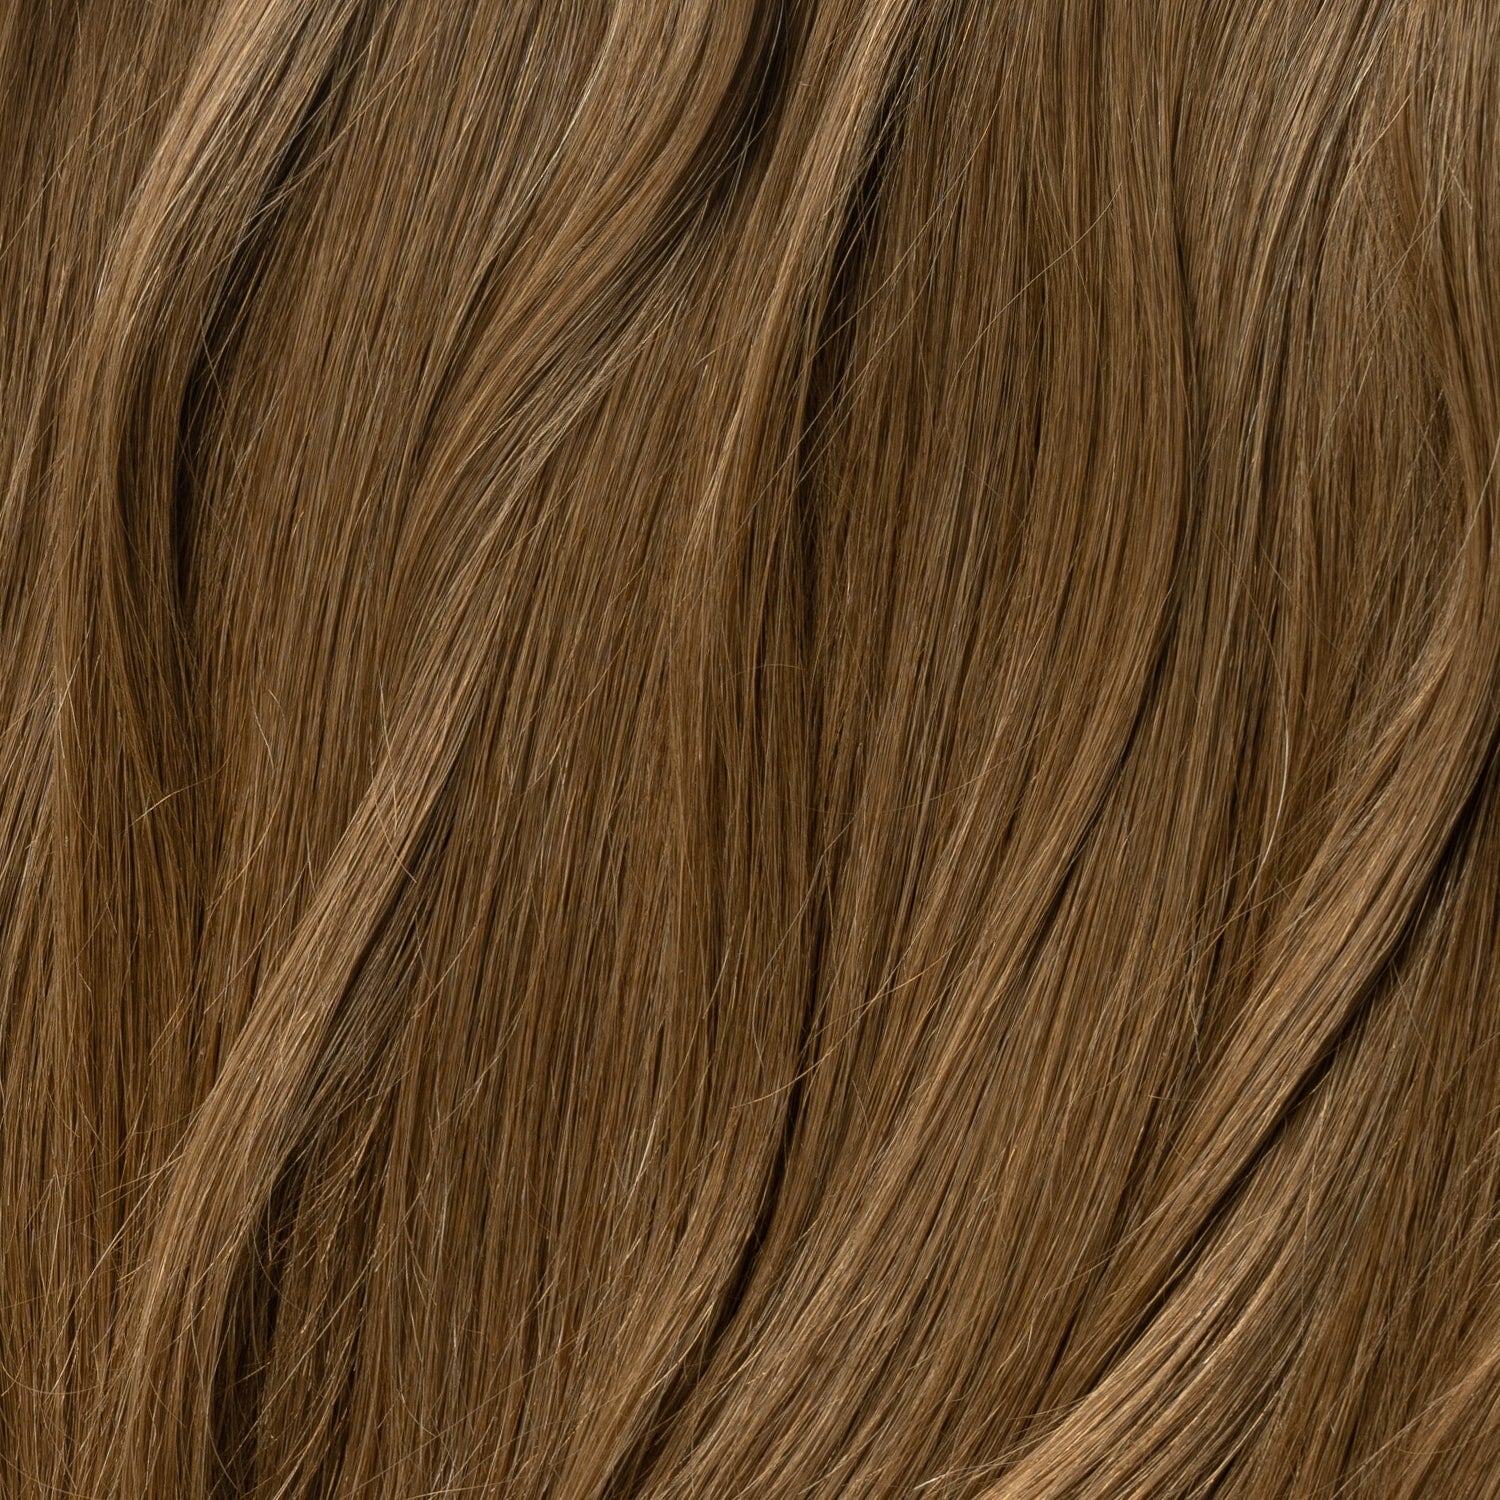 Tape extensions - Natural Brown 3